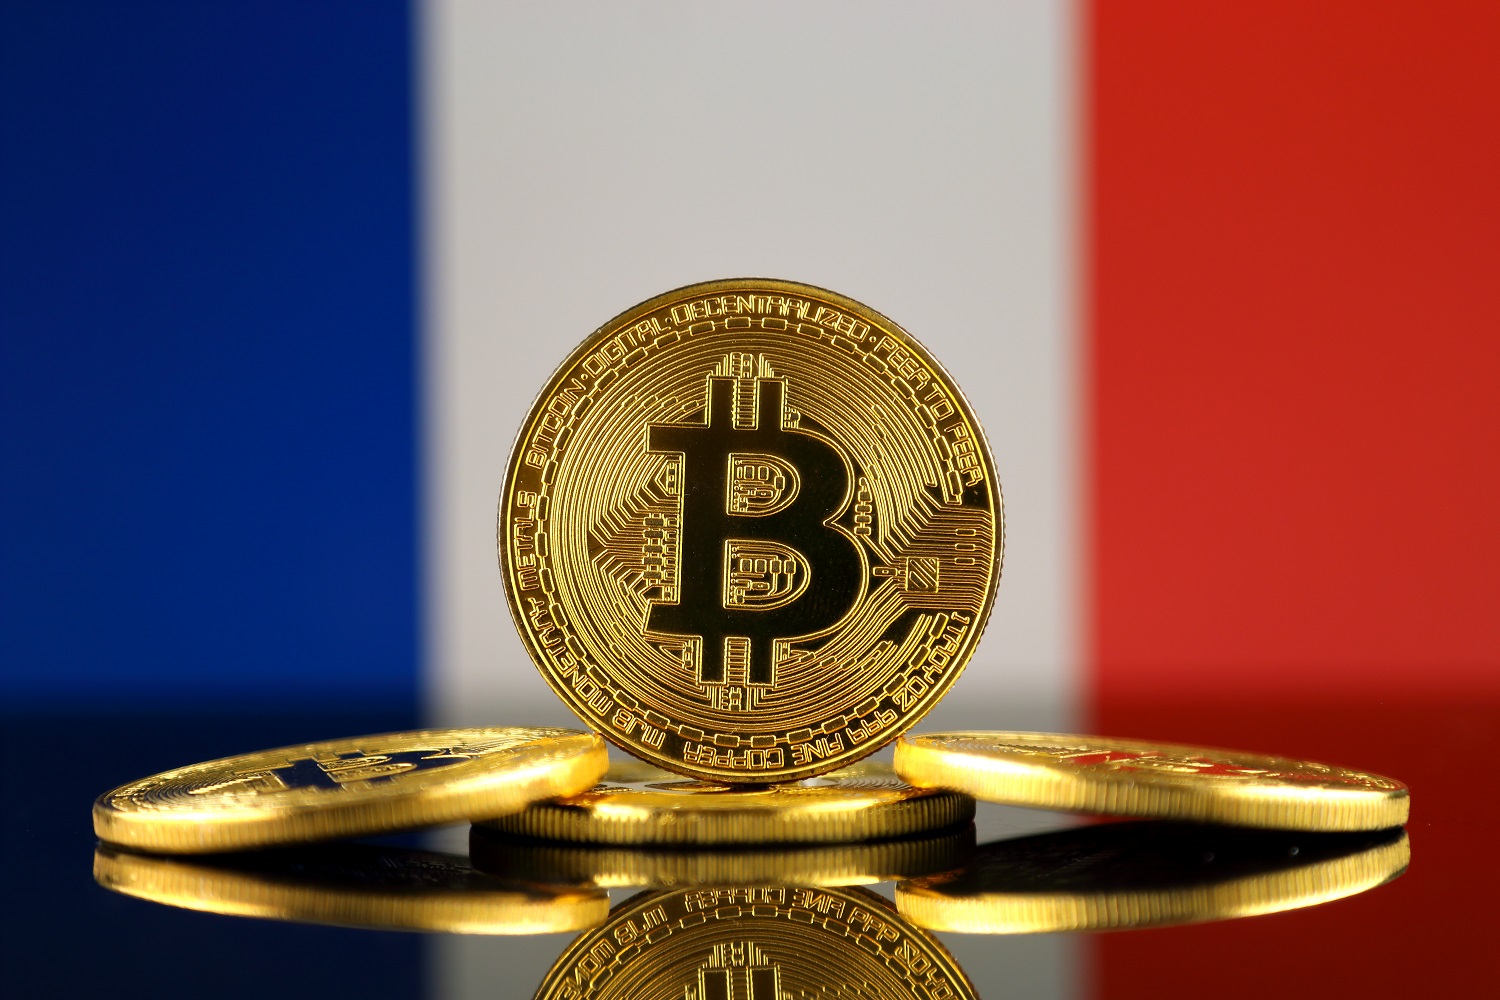 Coins representing Bitcoin against the background of a French flag.